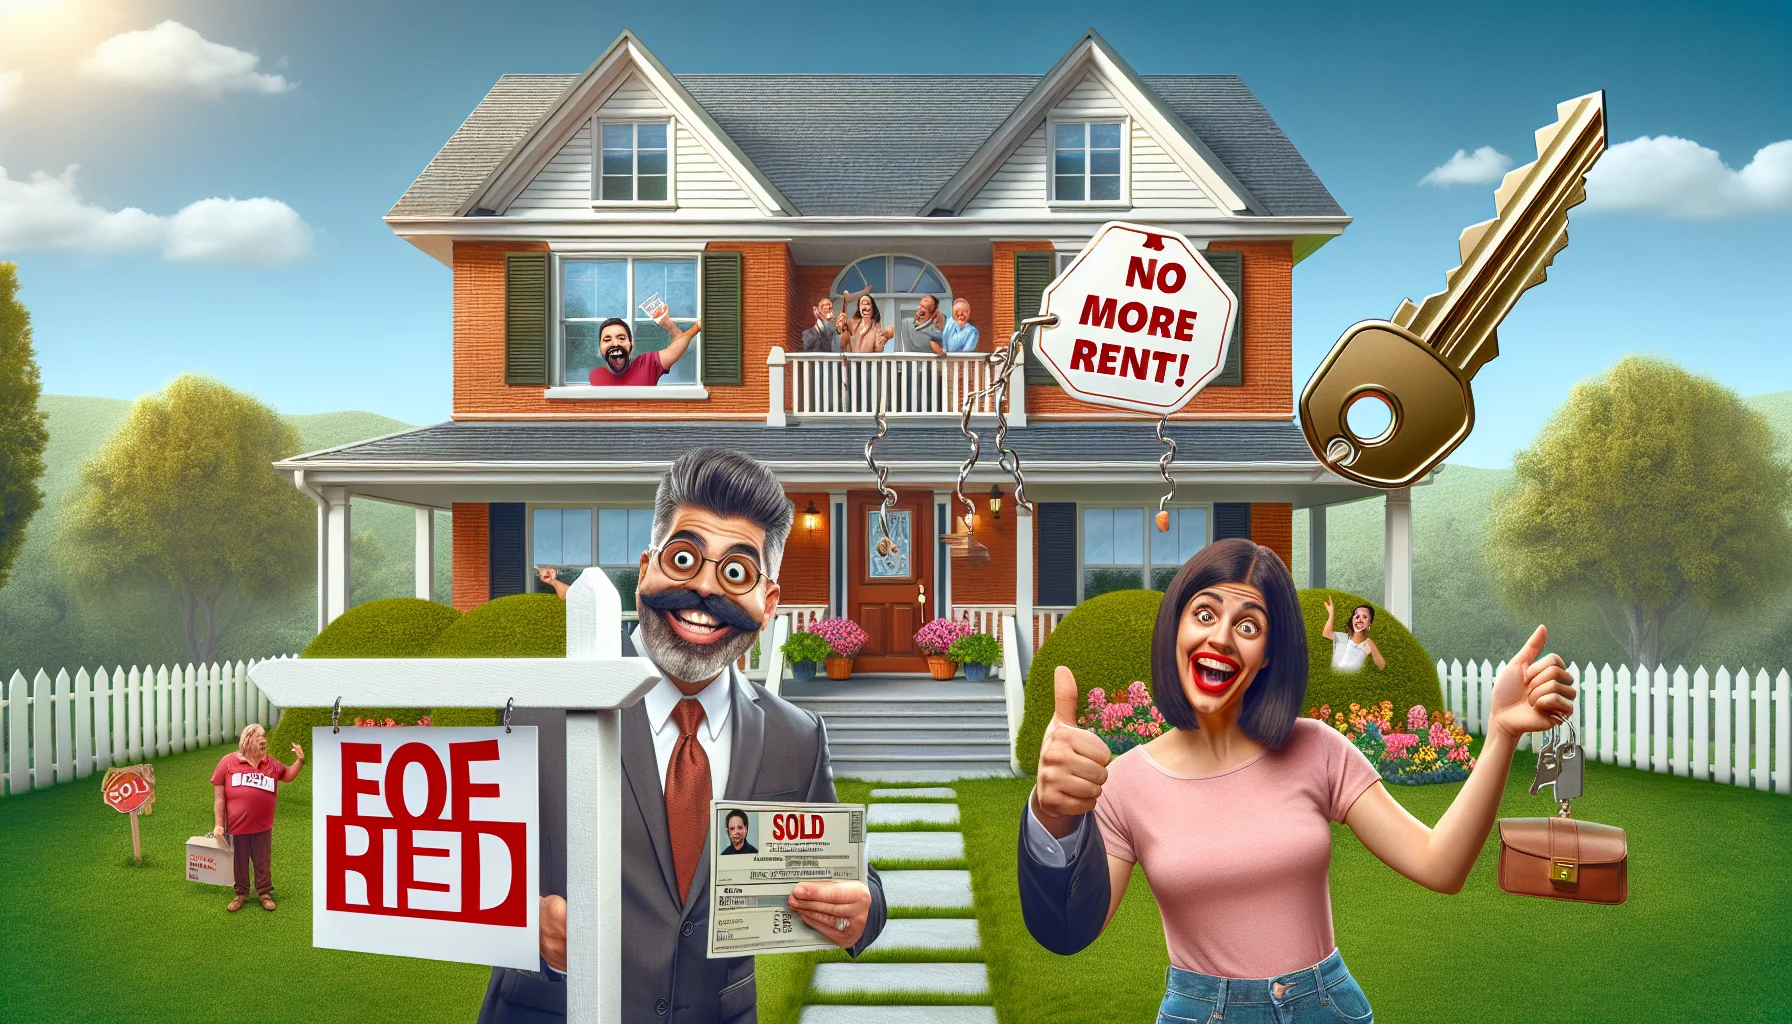 Imagine a humoristic and realistic scenario showing the perfect real estate condition for a house mortgage. The house is an idyllic two-story detached suburban home with a charming red brick exterior, a white picket fence, and blooming flower beds. On the lawn, a sold sign appears, indicating success. A jovial male real estate agent of South Asian descent holds a shiny key in the air, and a joyous Hispanic female homebuyer looks elated, having secured her ideal home. An oversized tag hanging from the key humorously reads 'No More Rent!' to lighten the mood. The backdrop is a clear sunny day.